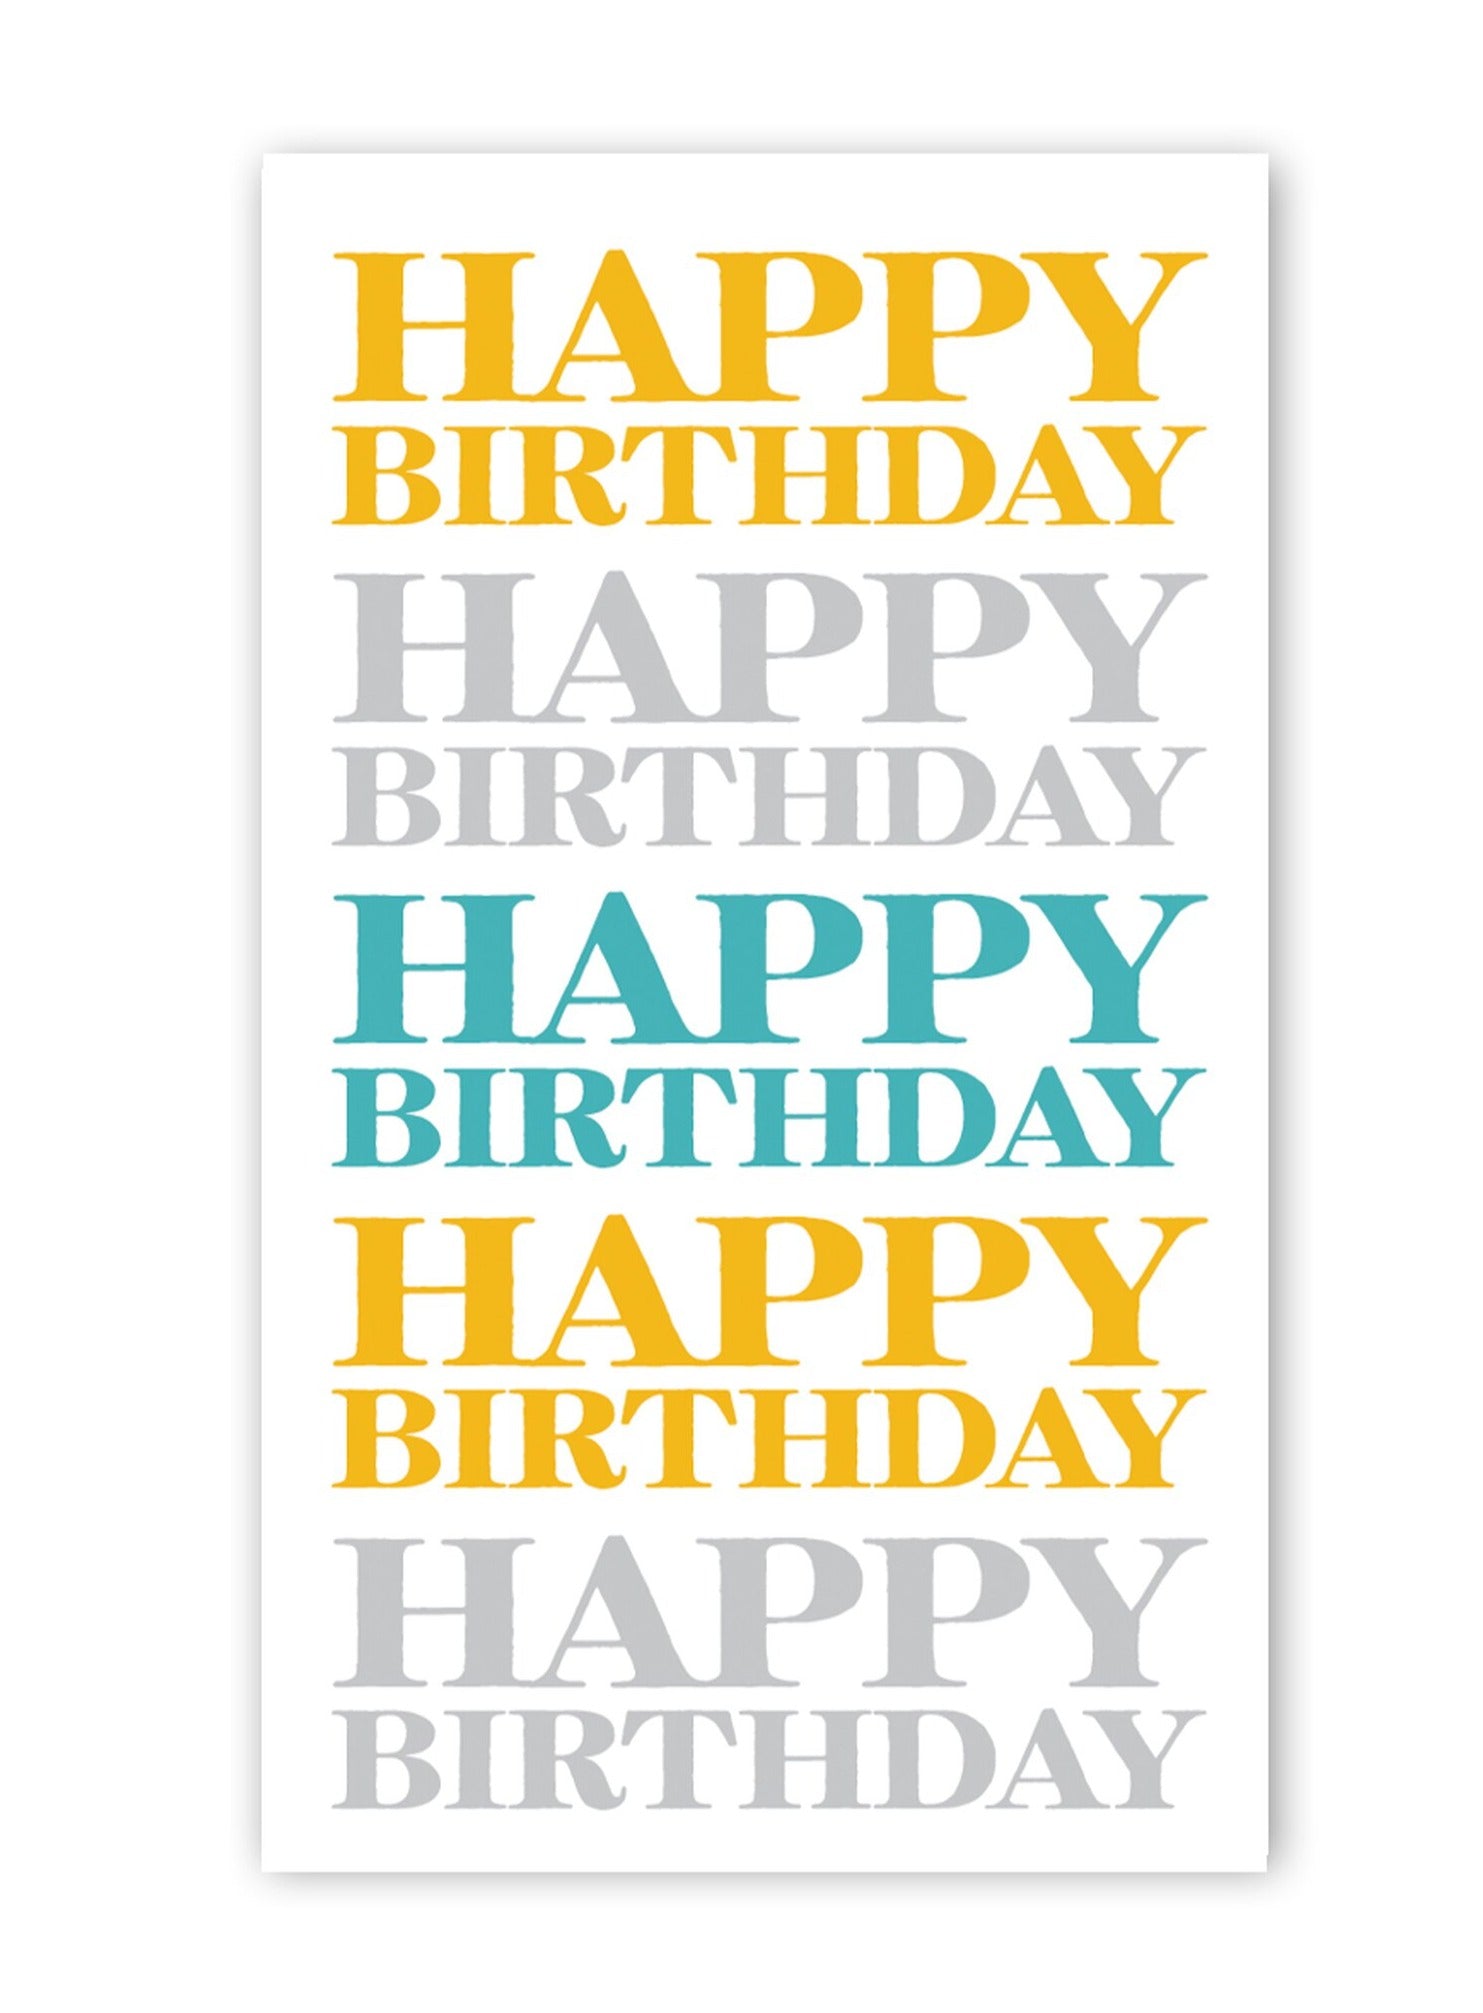 Mini Made Greeting Cards - FINAL SALE Home & Lifestyle Happy Birthday Card